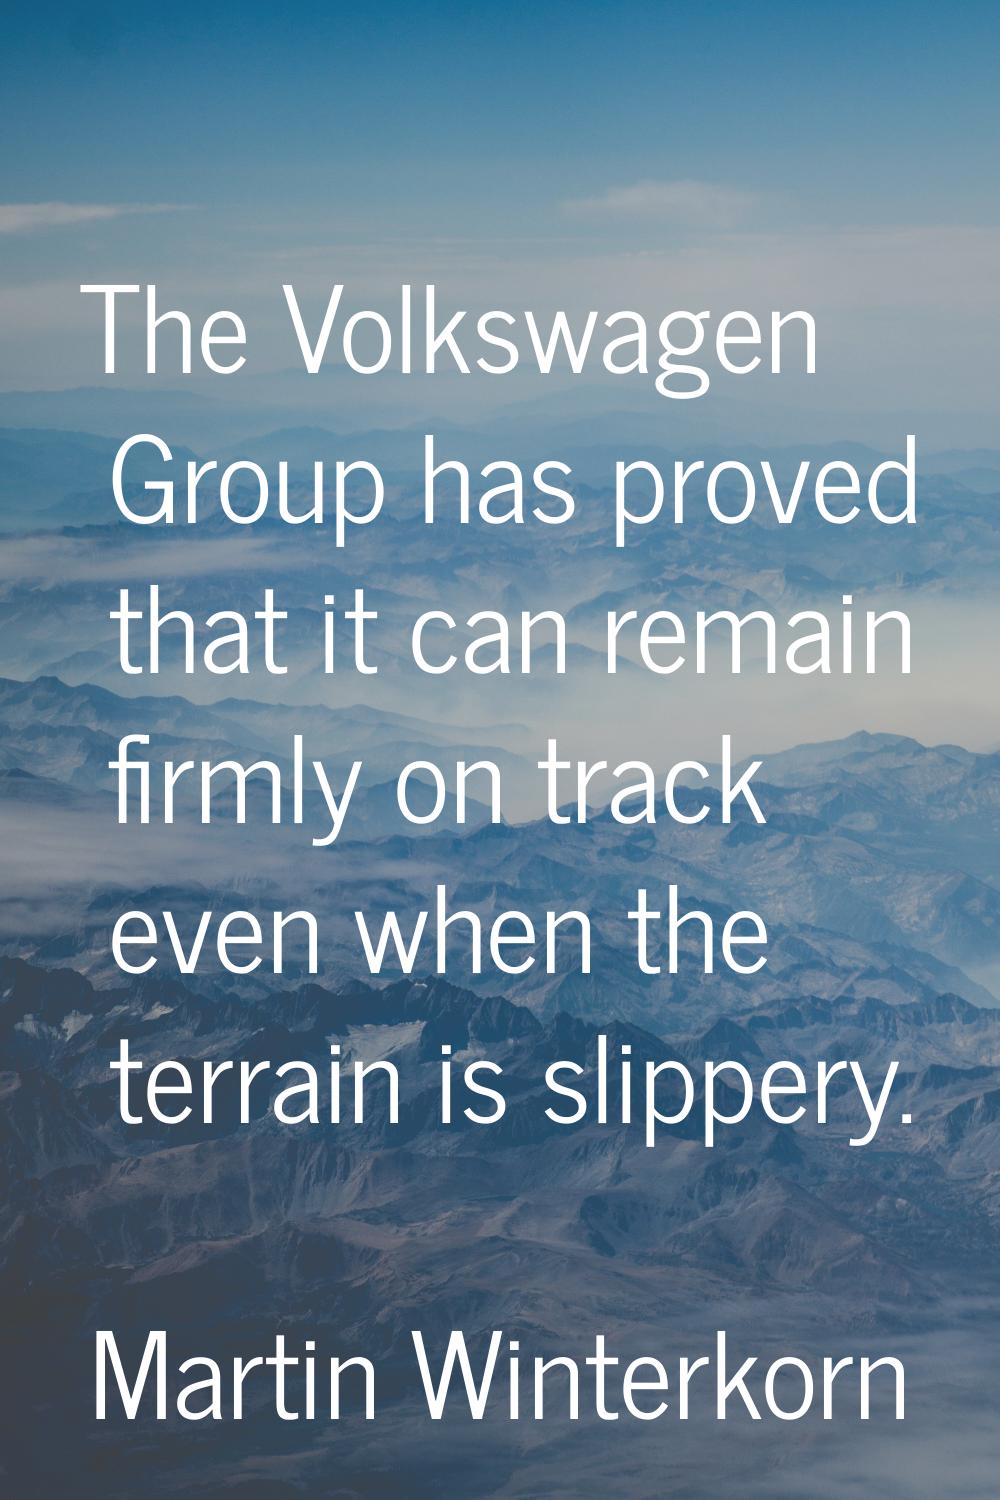 The Volkswagen Group has proved that it can remain firmly on track even when the terrain is slipper